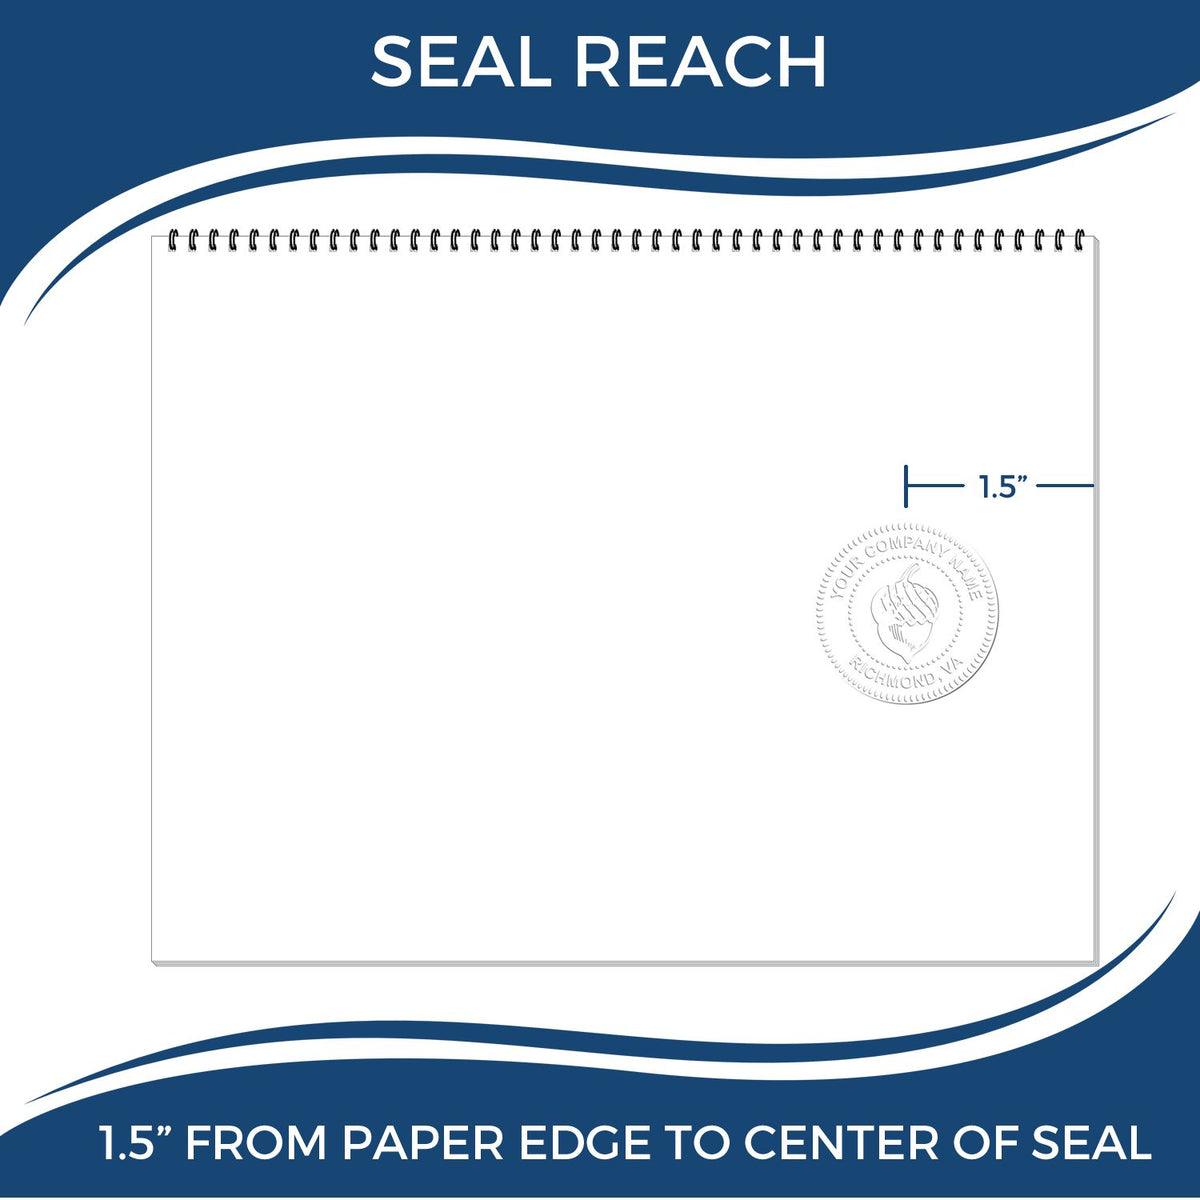 An infographic showing the seal reach which is represented by a ruler and a miniature seal image of the Gift Tennessee Architect Seal